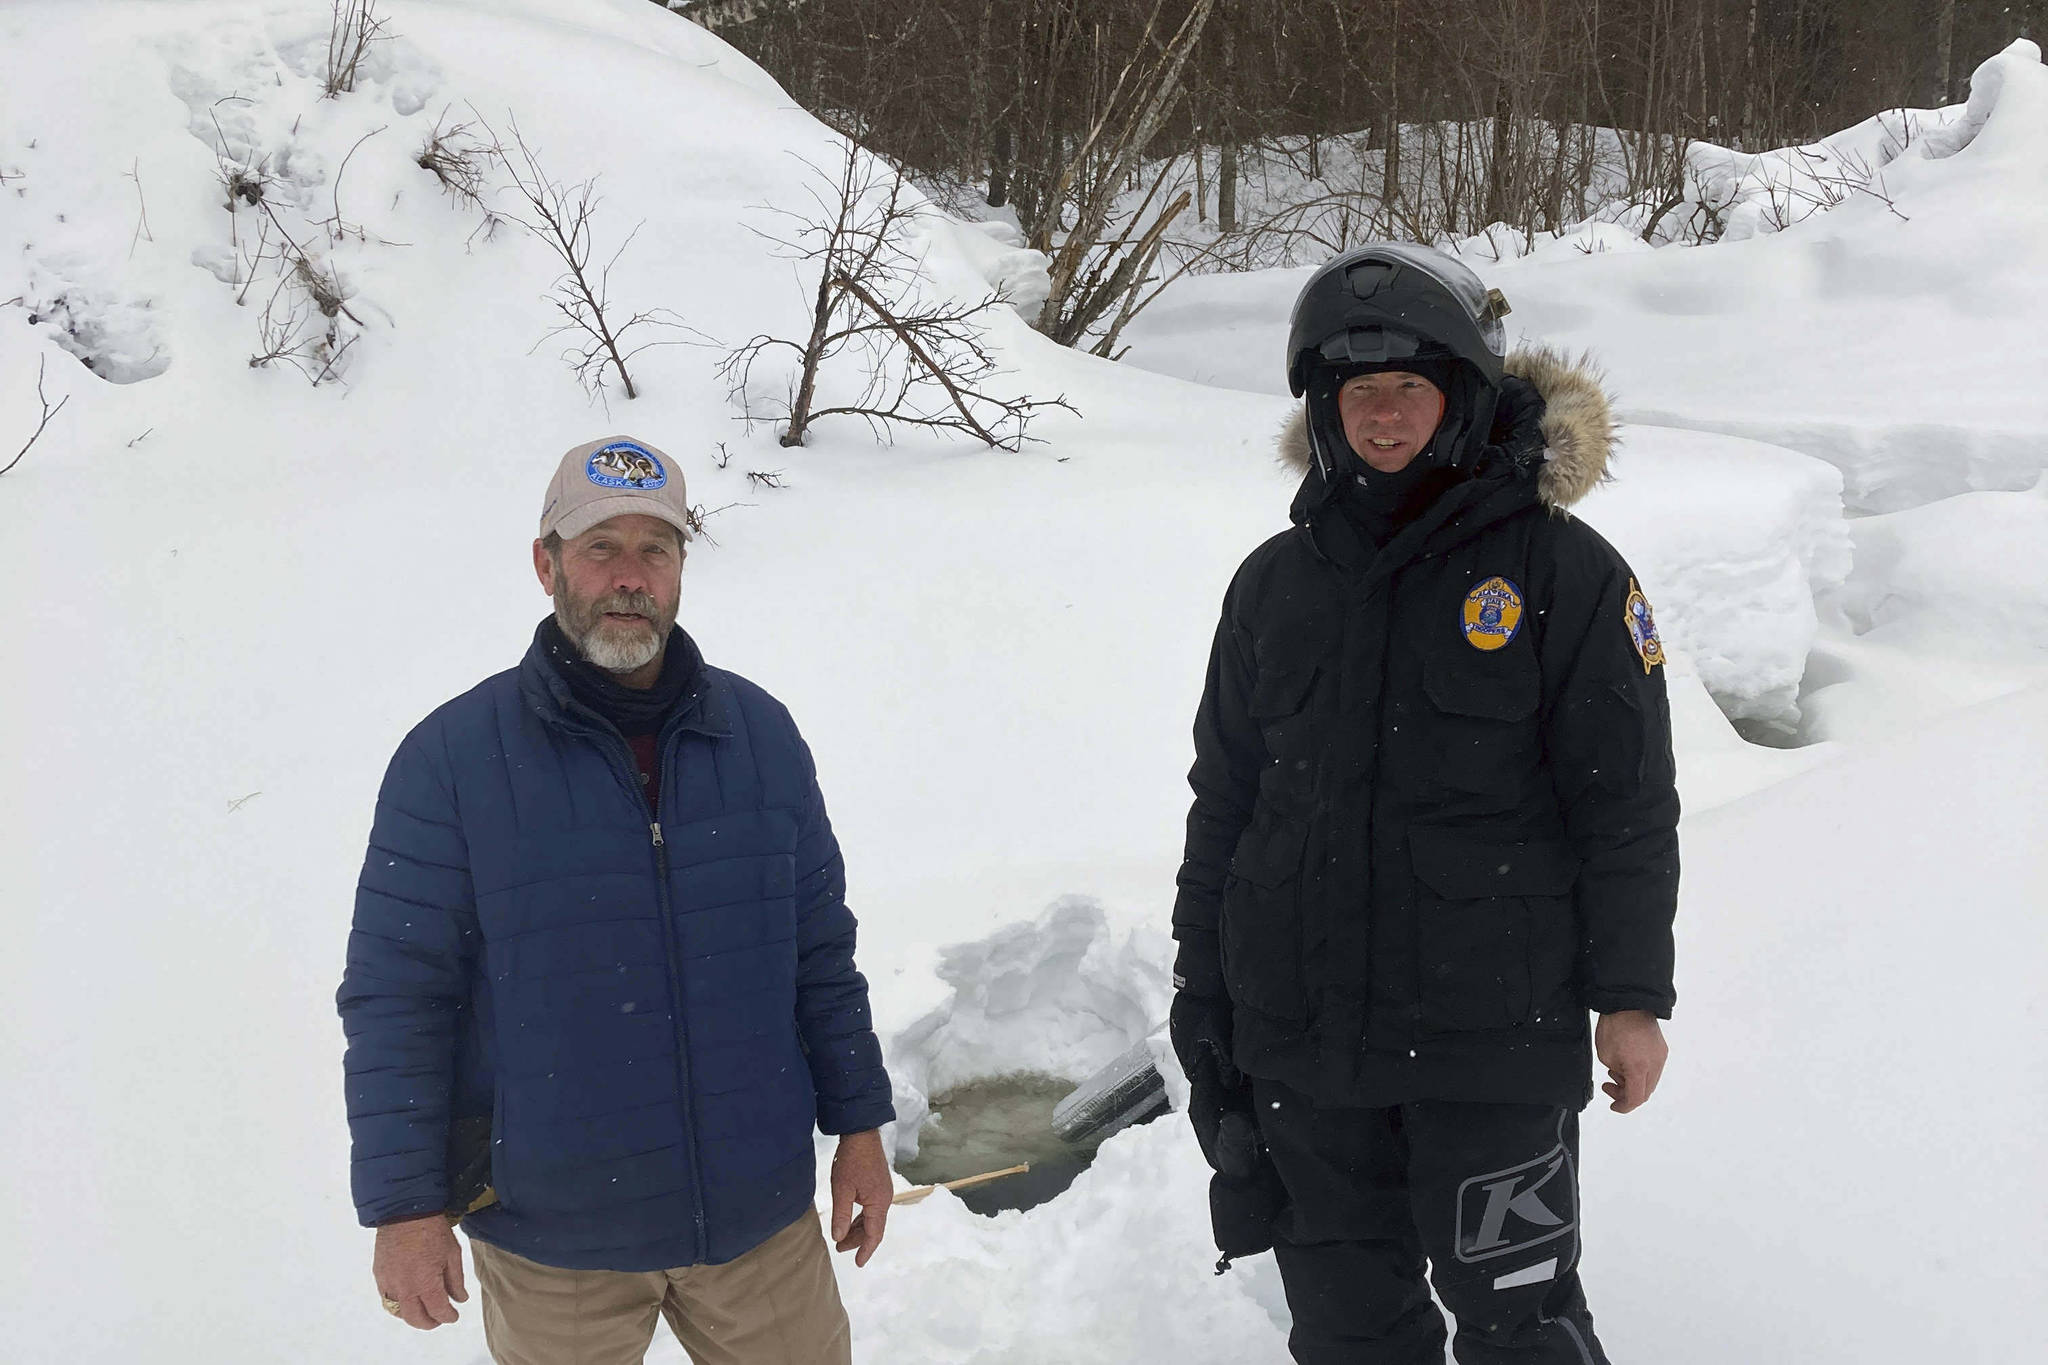 This photo provided by the Alaska Wildlife Troopers taken March 9, 2021, Doug Ramsey, left, of Sundance Wyoming, poses with Alaska Wildlife Trooper Jason Kneier near a hole in the ice of a river in Swentna, Alaska. The two helped pull an 8-year-old boy from the water after he fell into the river. (Alaska Wildlife Troopers via AP)